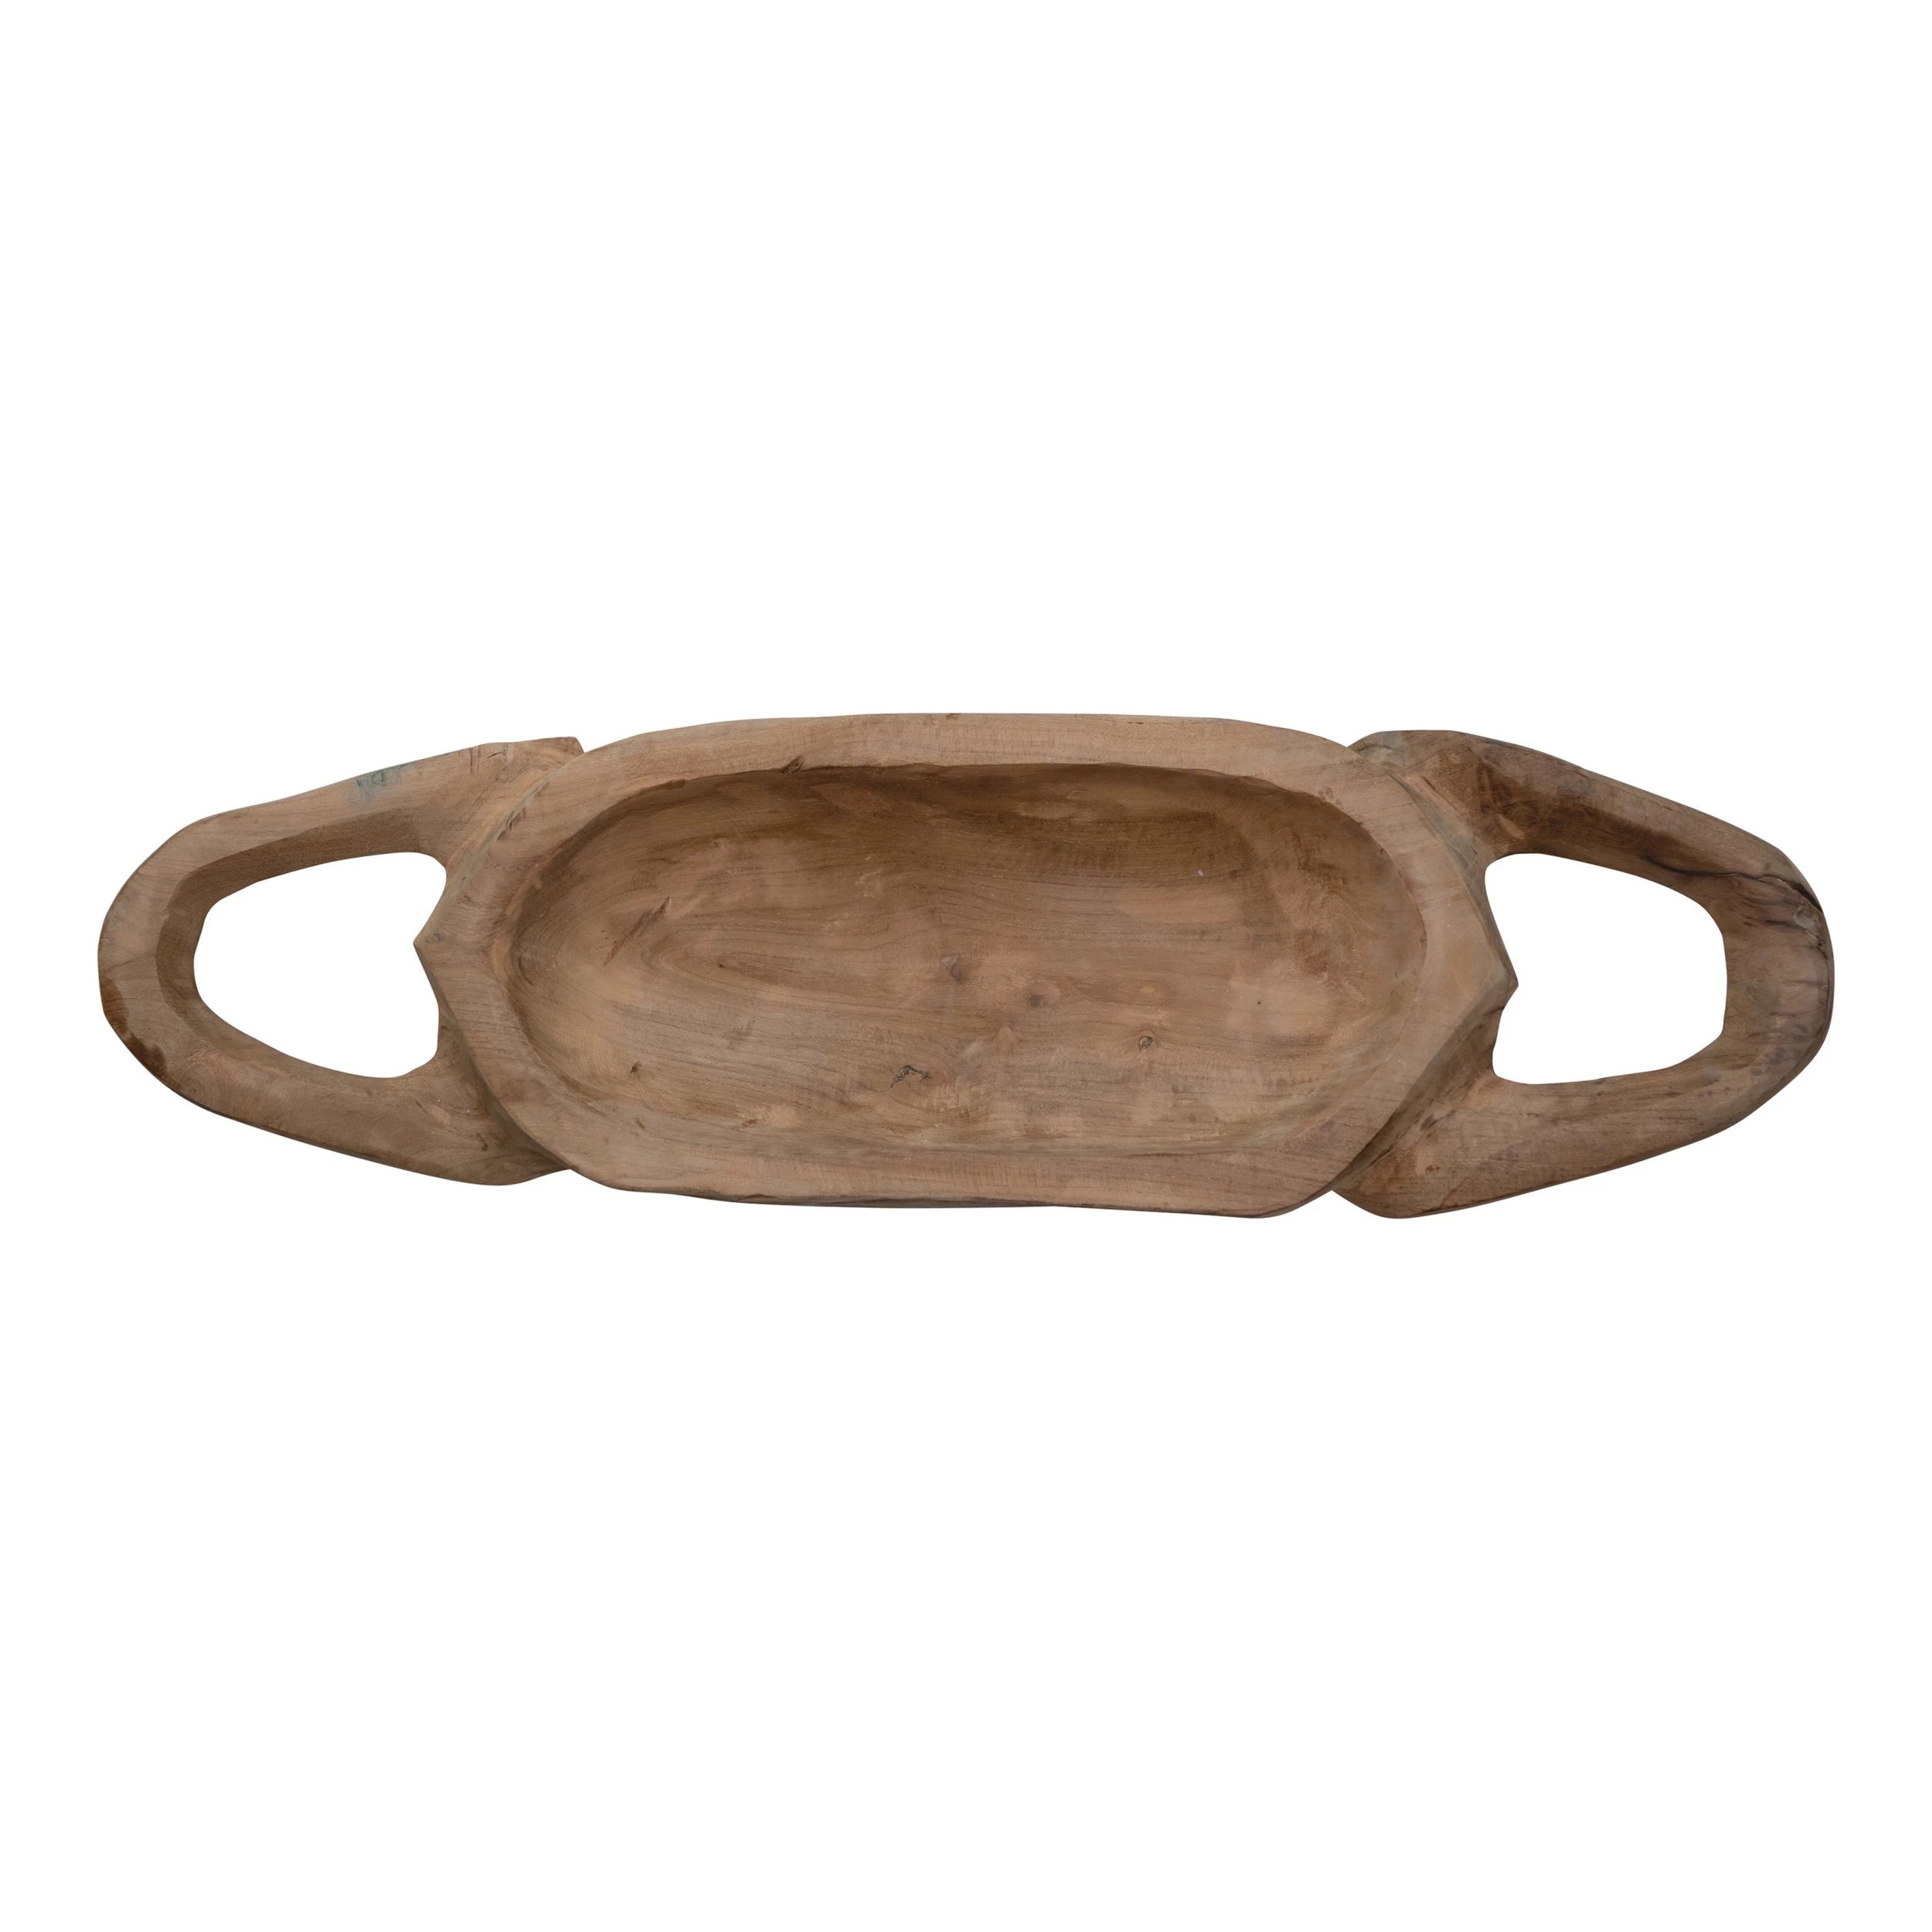 Wooden Bowl with Handle - Image 4